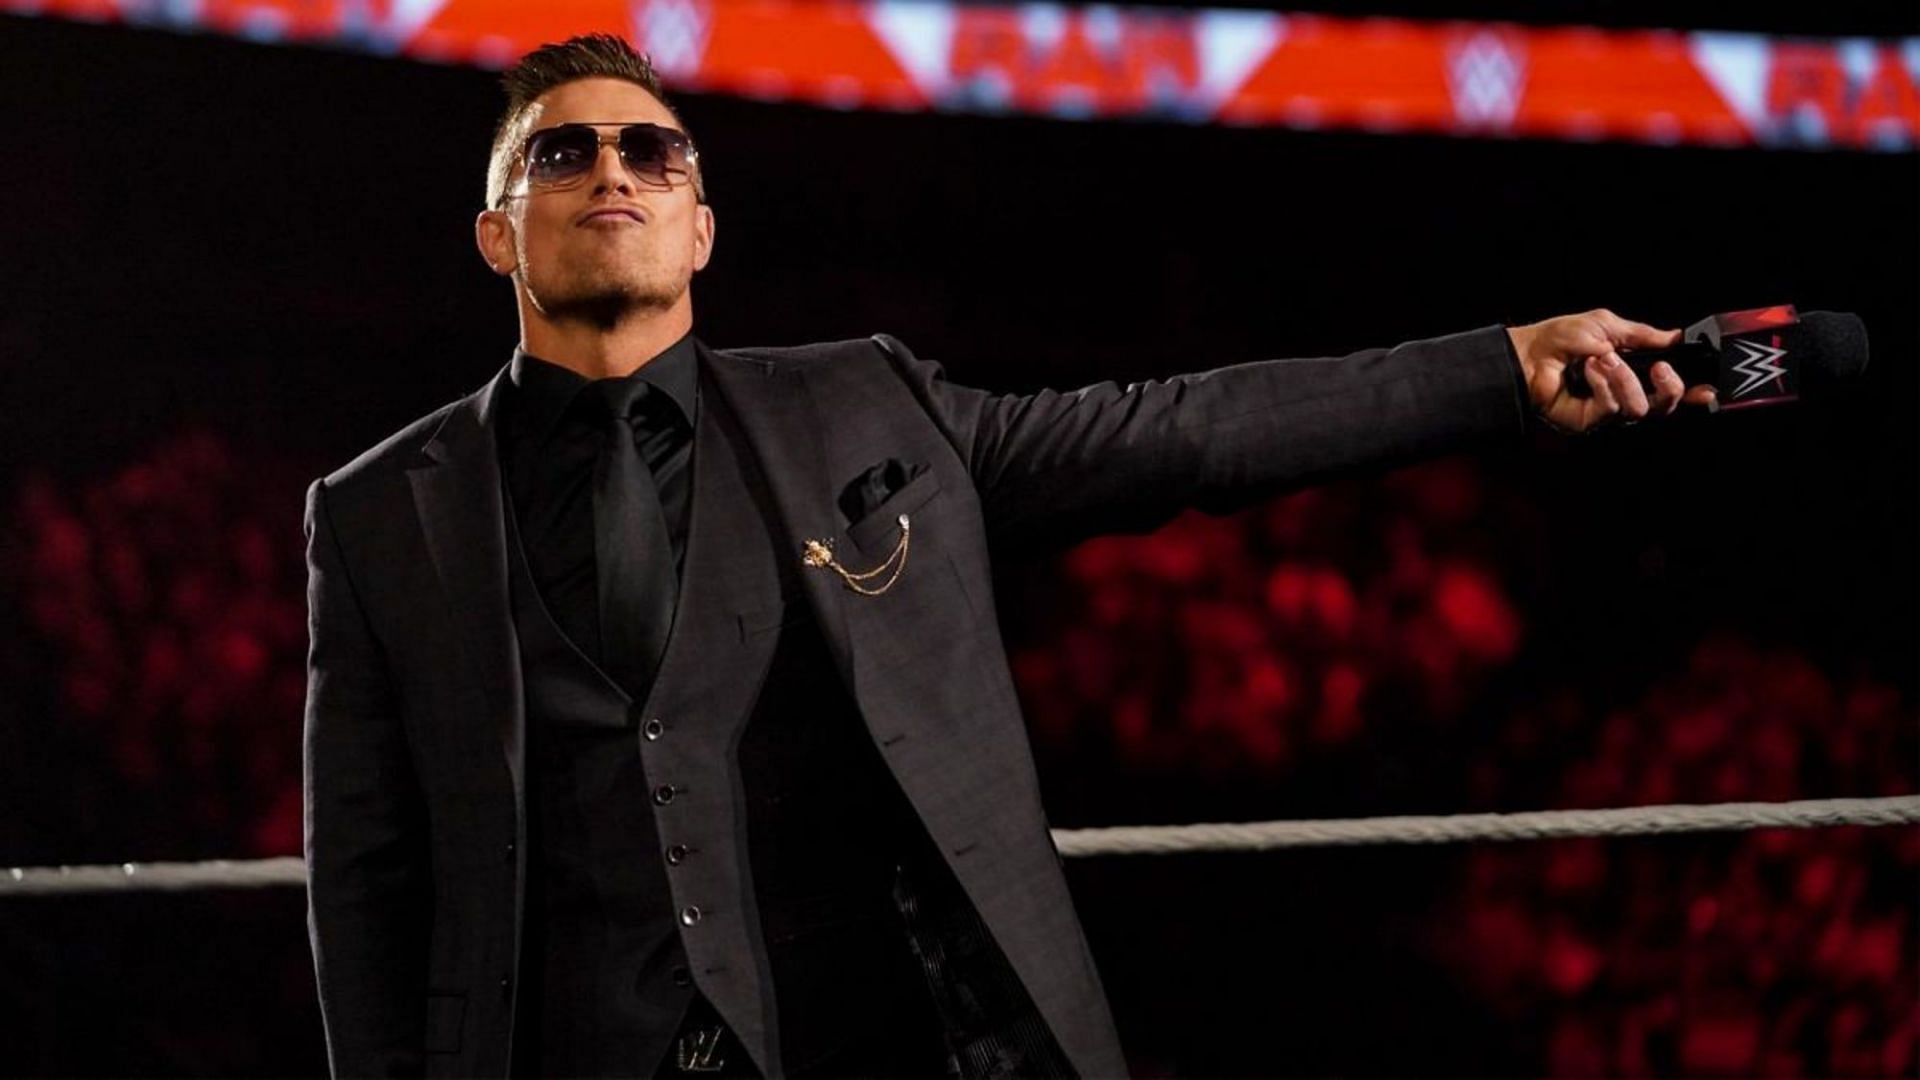 The Miz knows Hollywood better than any WWE Superstar!